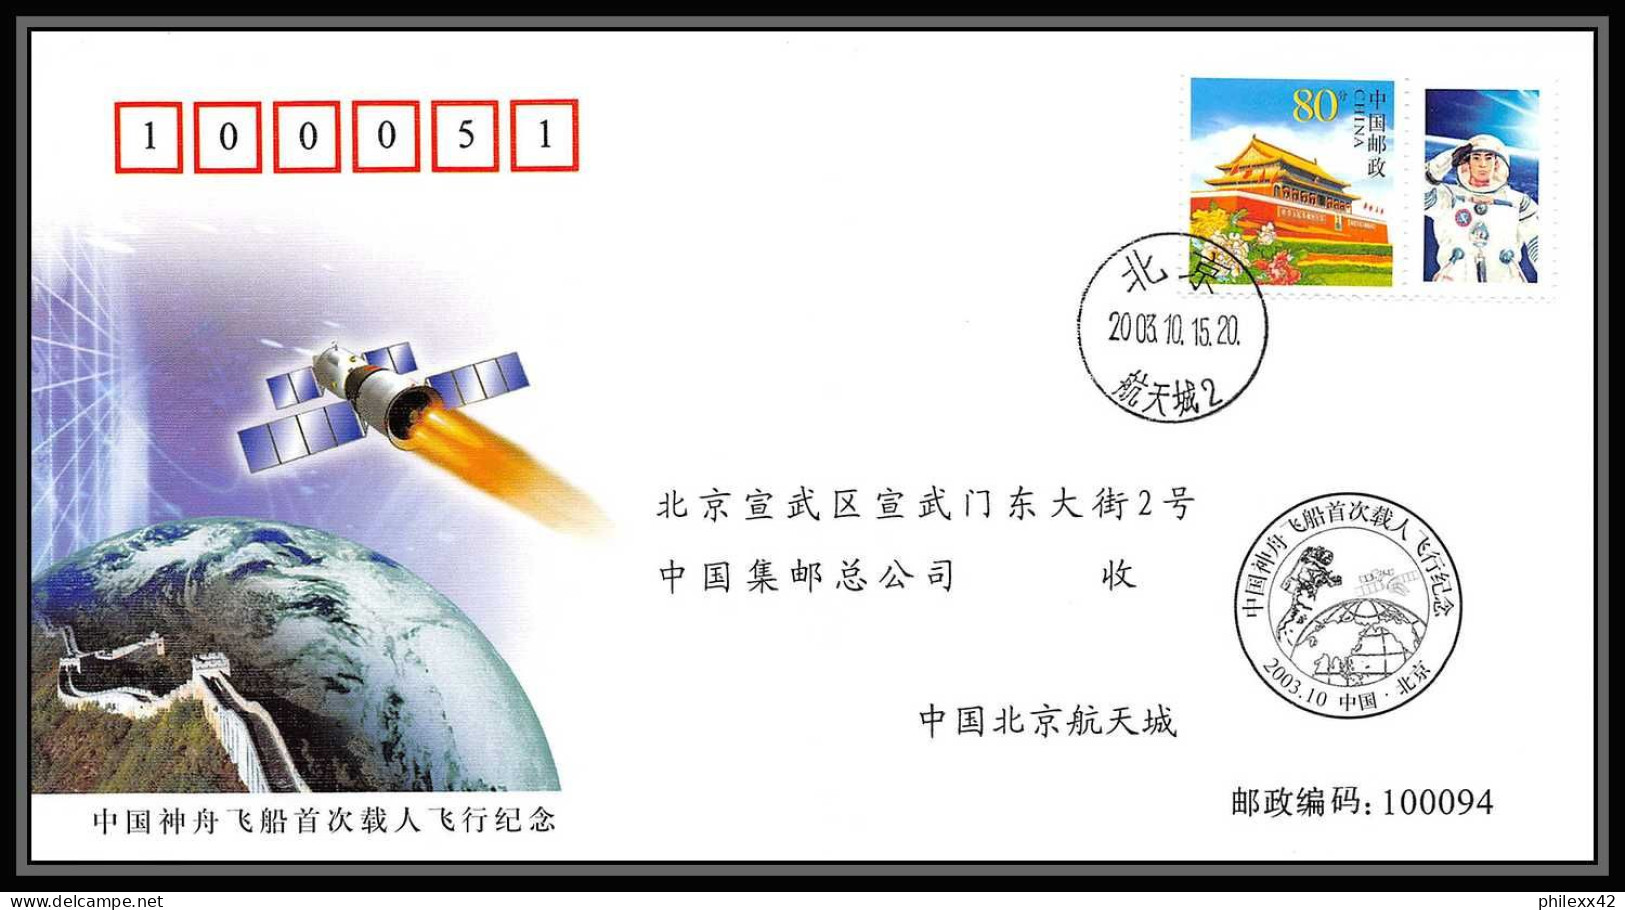 1326 Espace (space Raumfahrt) Lettre (cover Briefe) CHINE China 16/10/2003 First Manned Spaceship Shenzhou Li Pingzhong - Asien